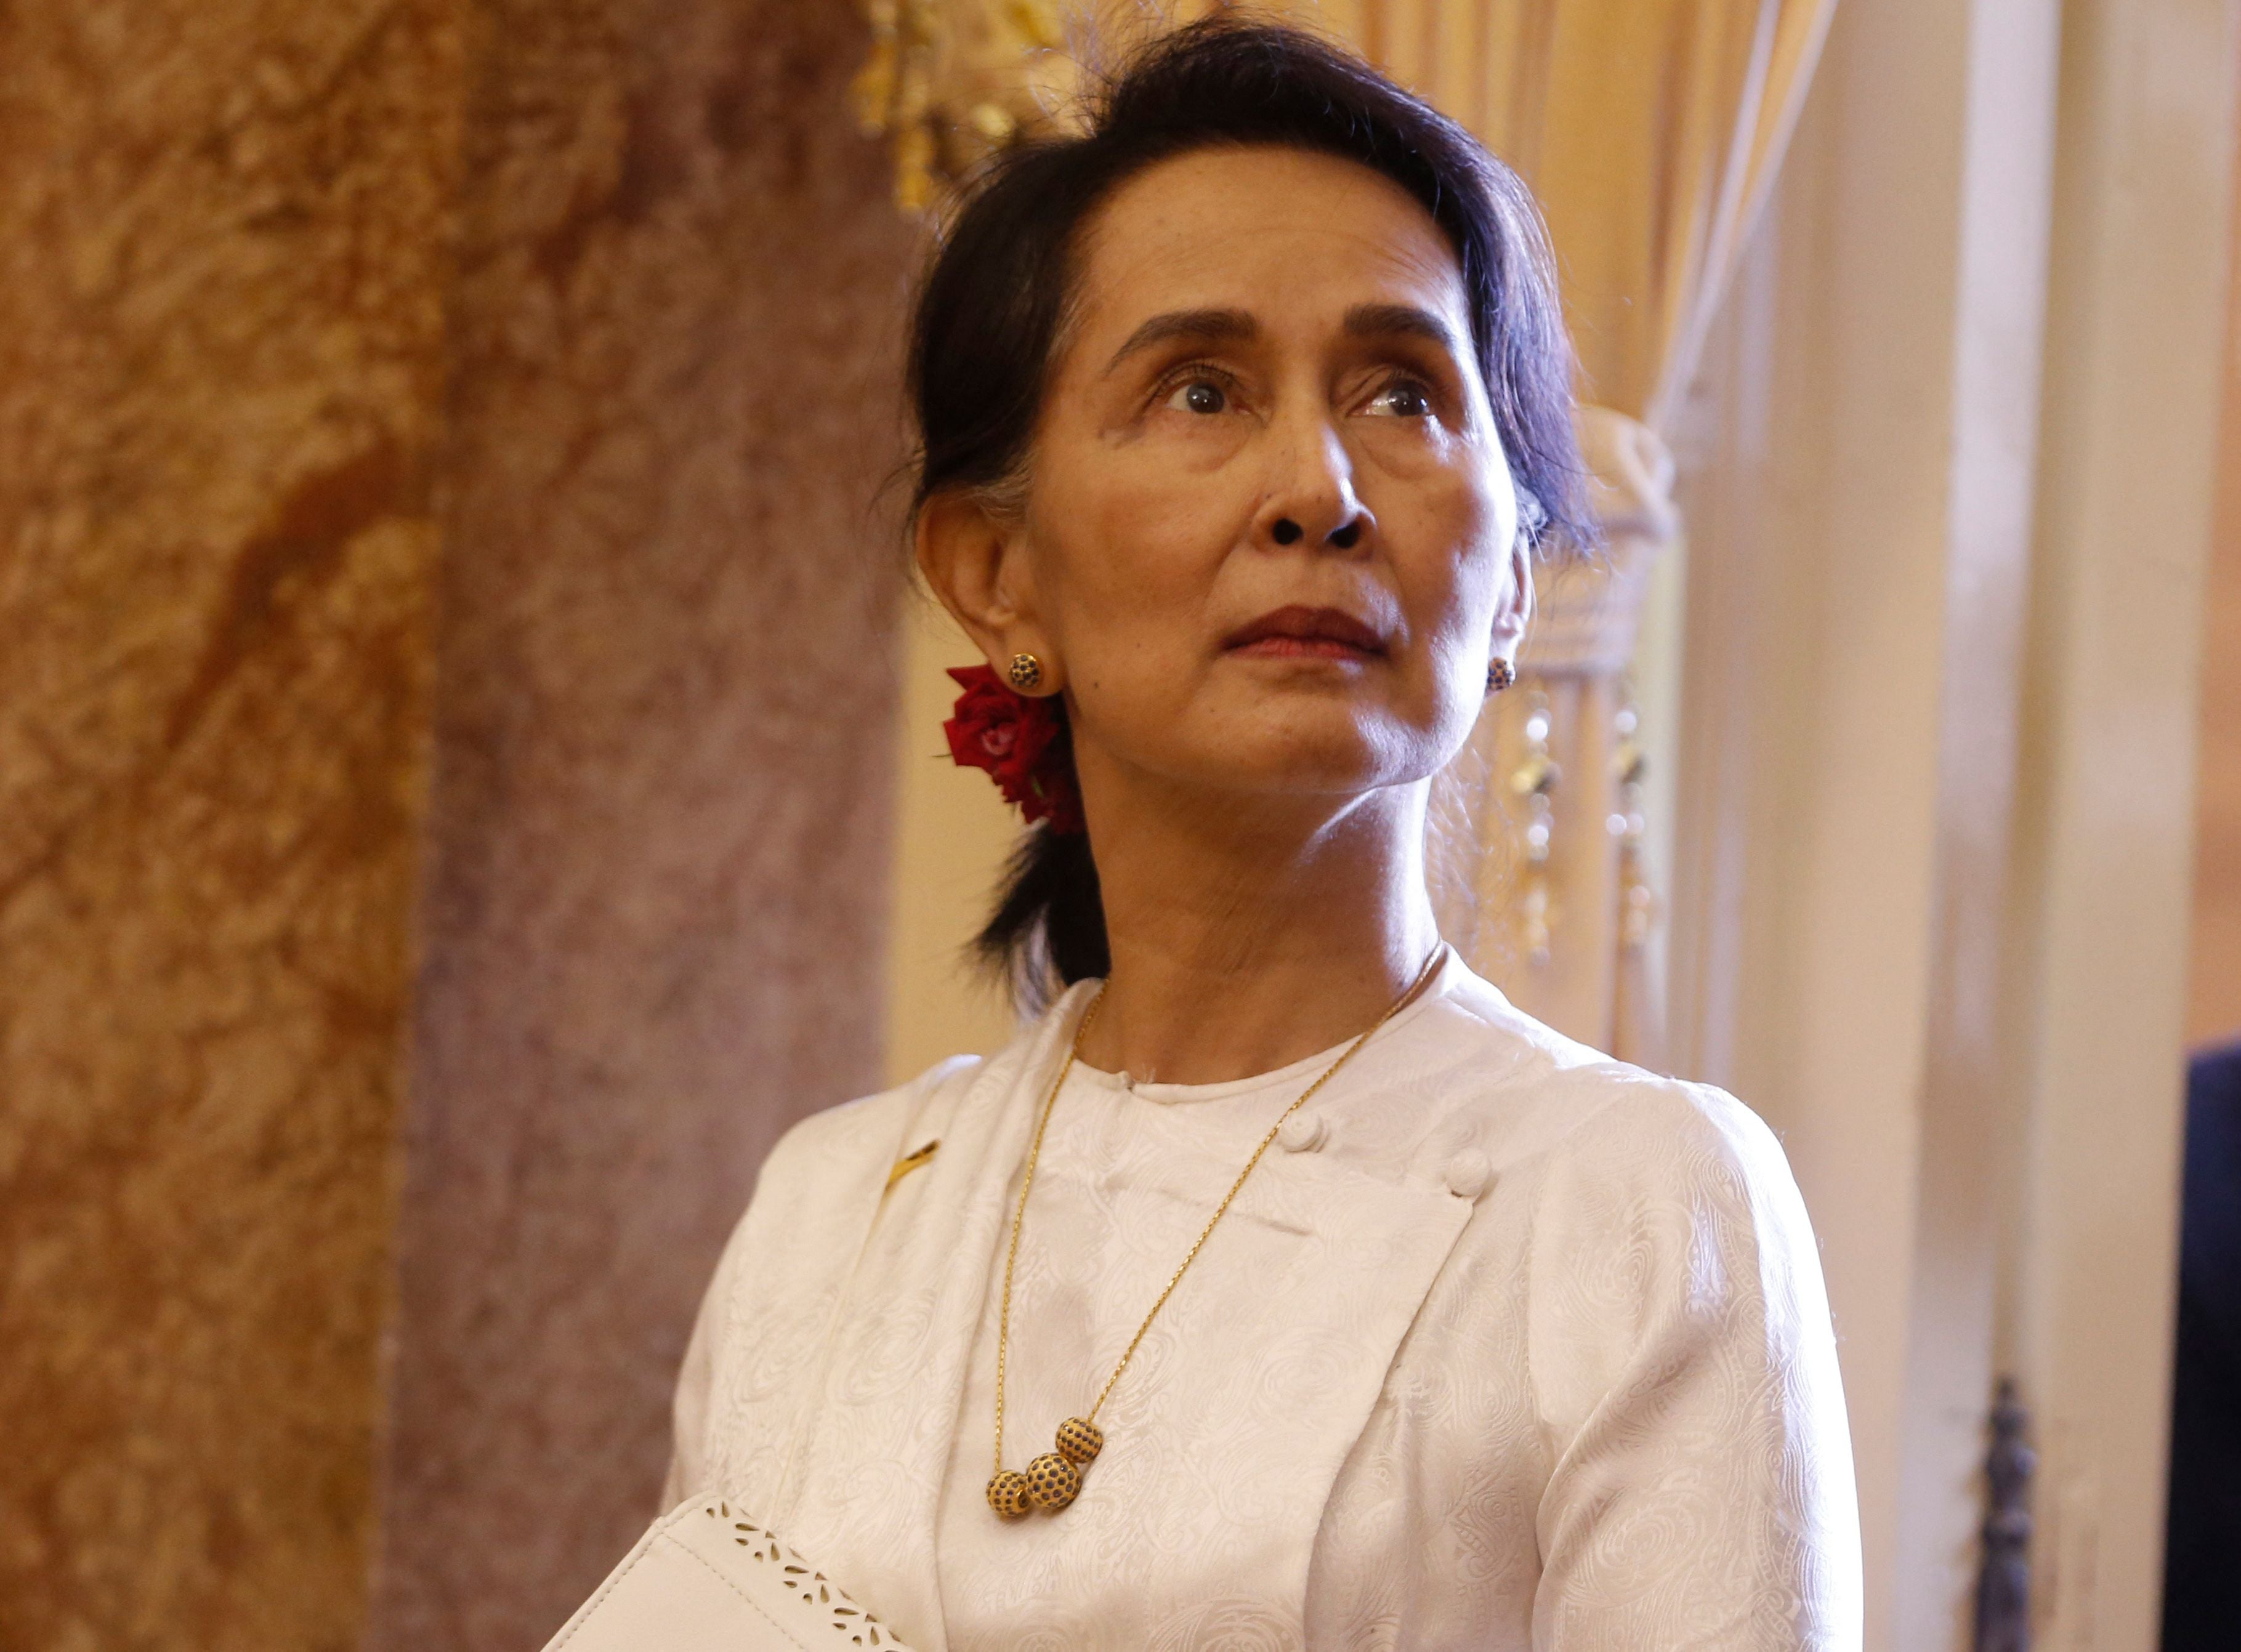 Myanmar’s military has pardoned five of 19 offences for former leader Aung San Suu Kyi, state media reported